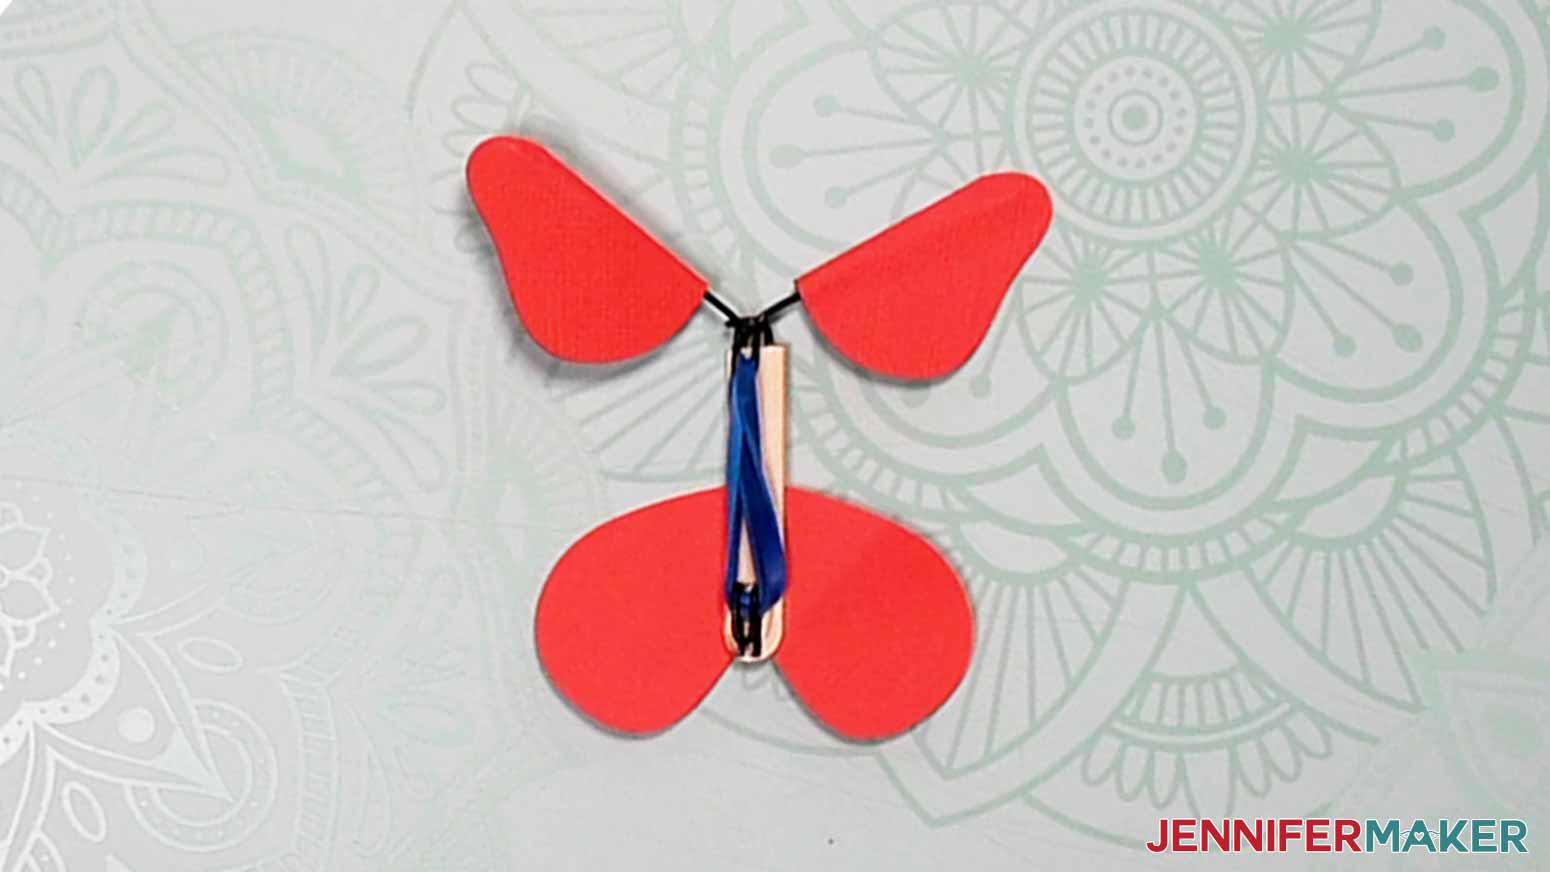 A finished magic butterfly showing red wing pieces on the top and bottom connected with shaped wire pieces attached to a cut popsicle stick. A blue rubber band is looped in the center.